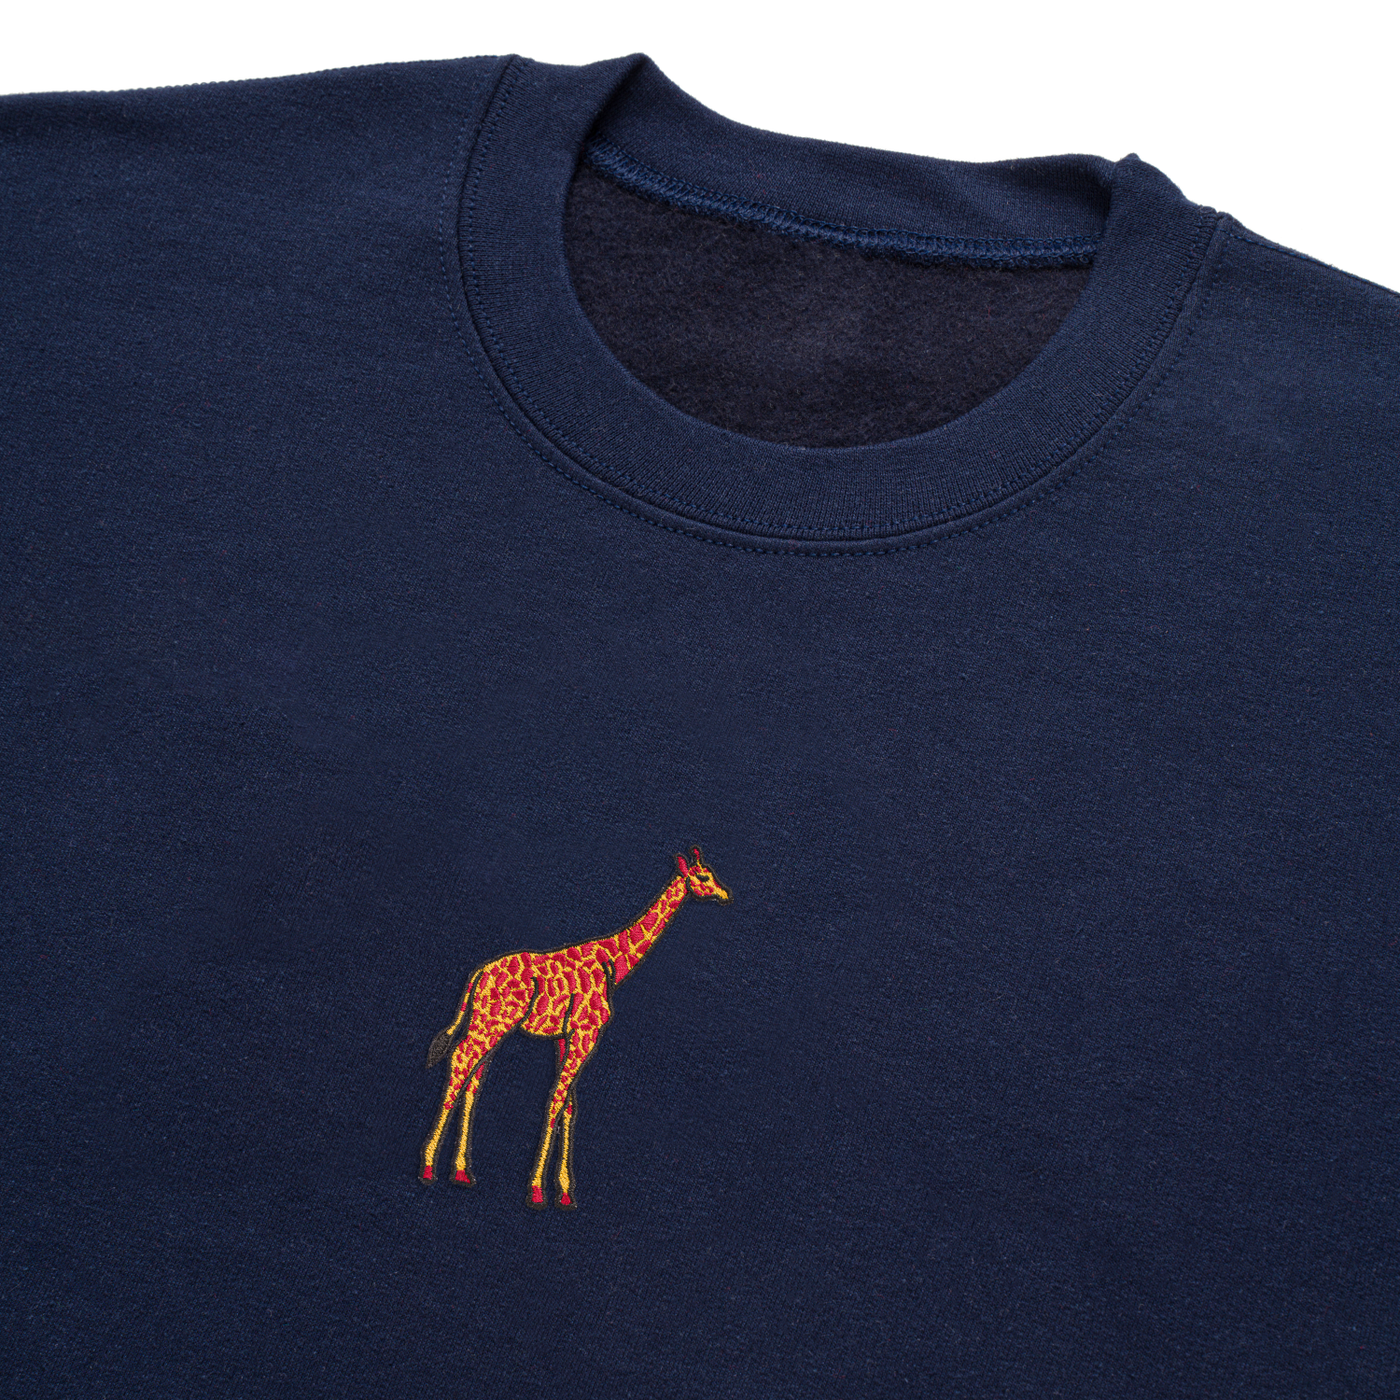 Bobby's Planet Women's Embroidered Giraffe Sweatshirt from African Animals Collection in Navy Color#color_navy